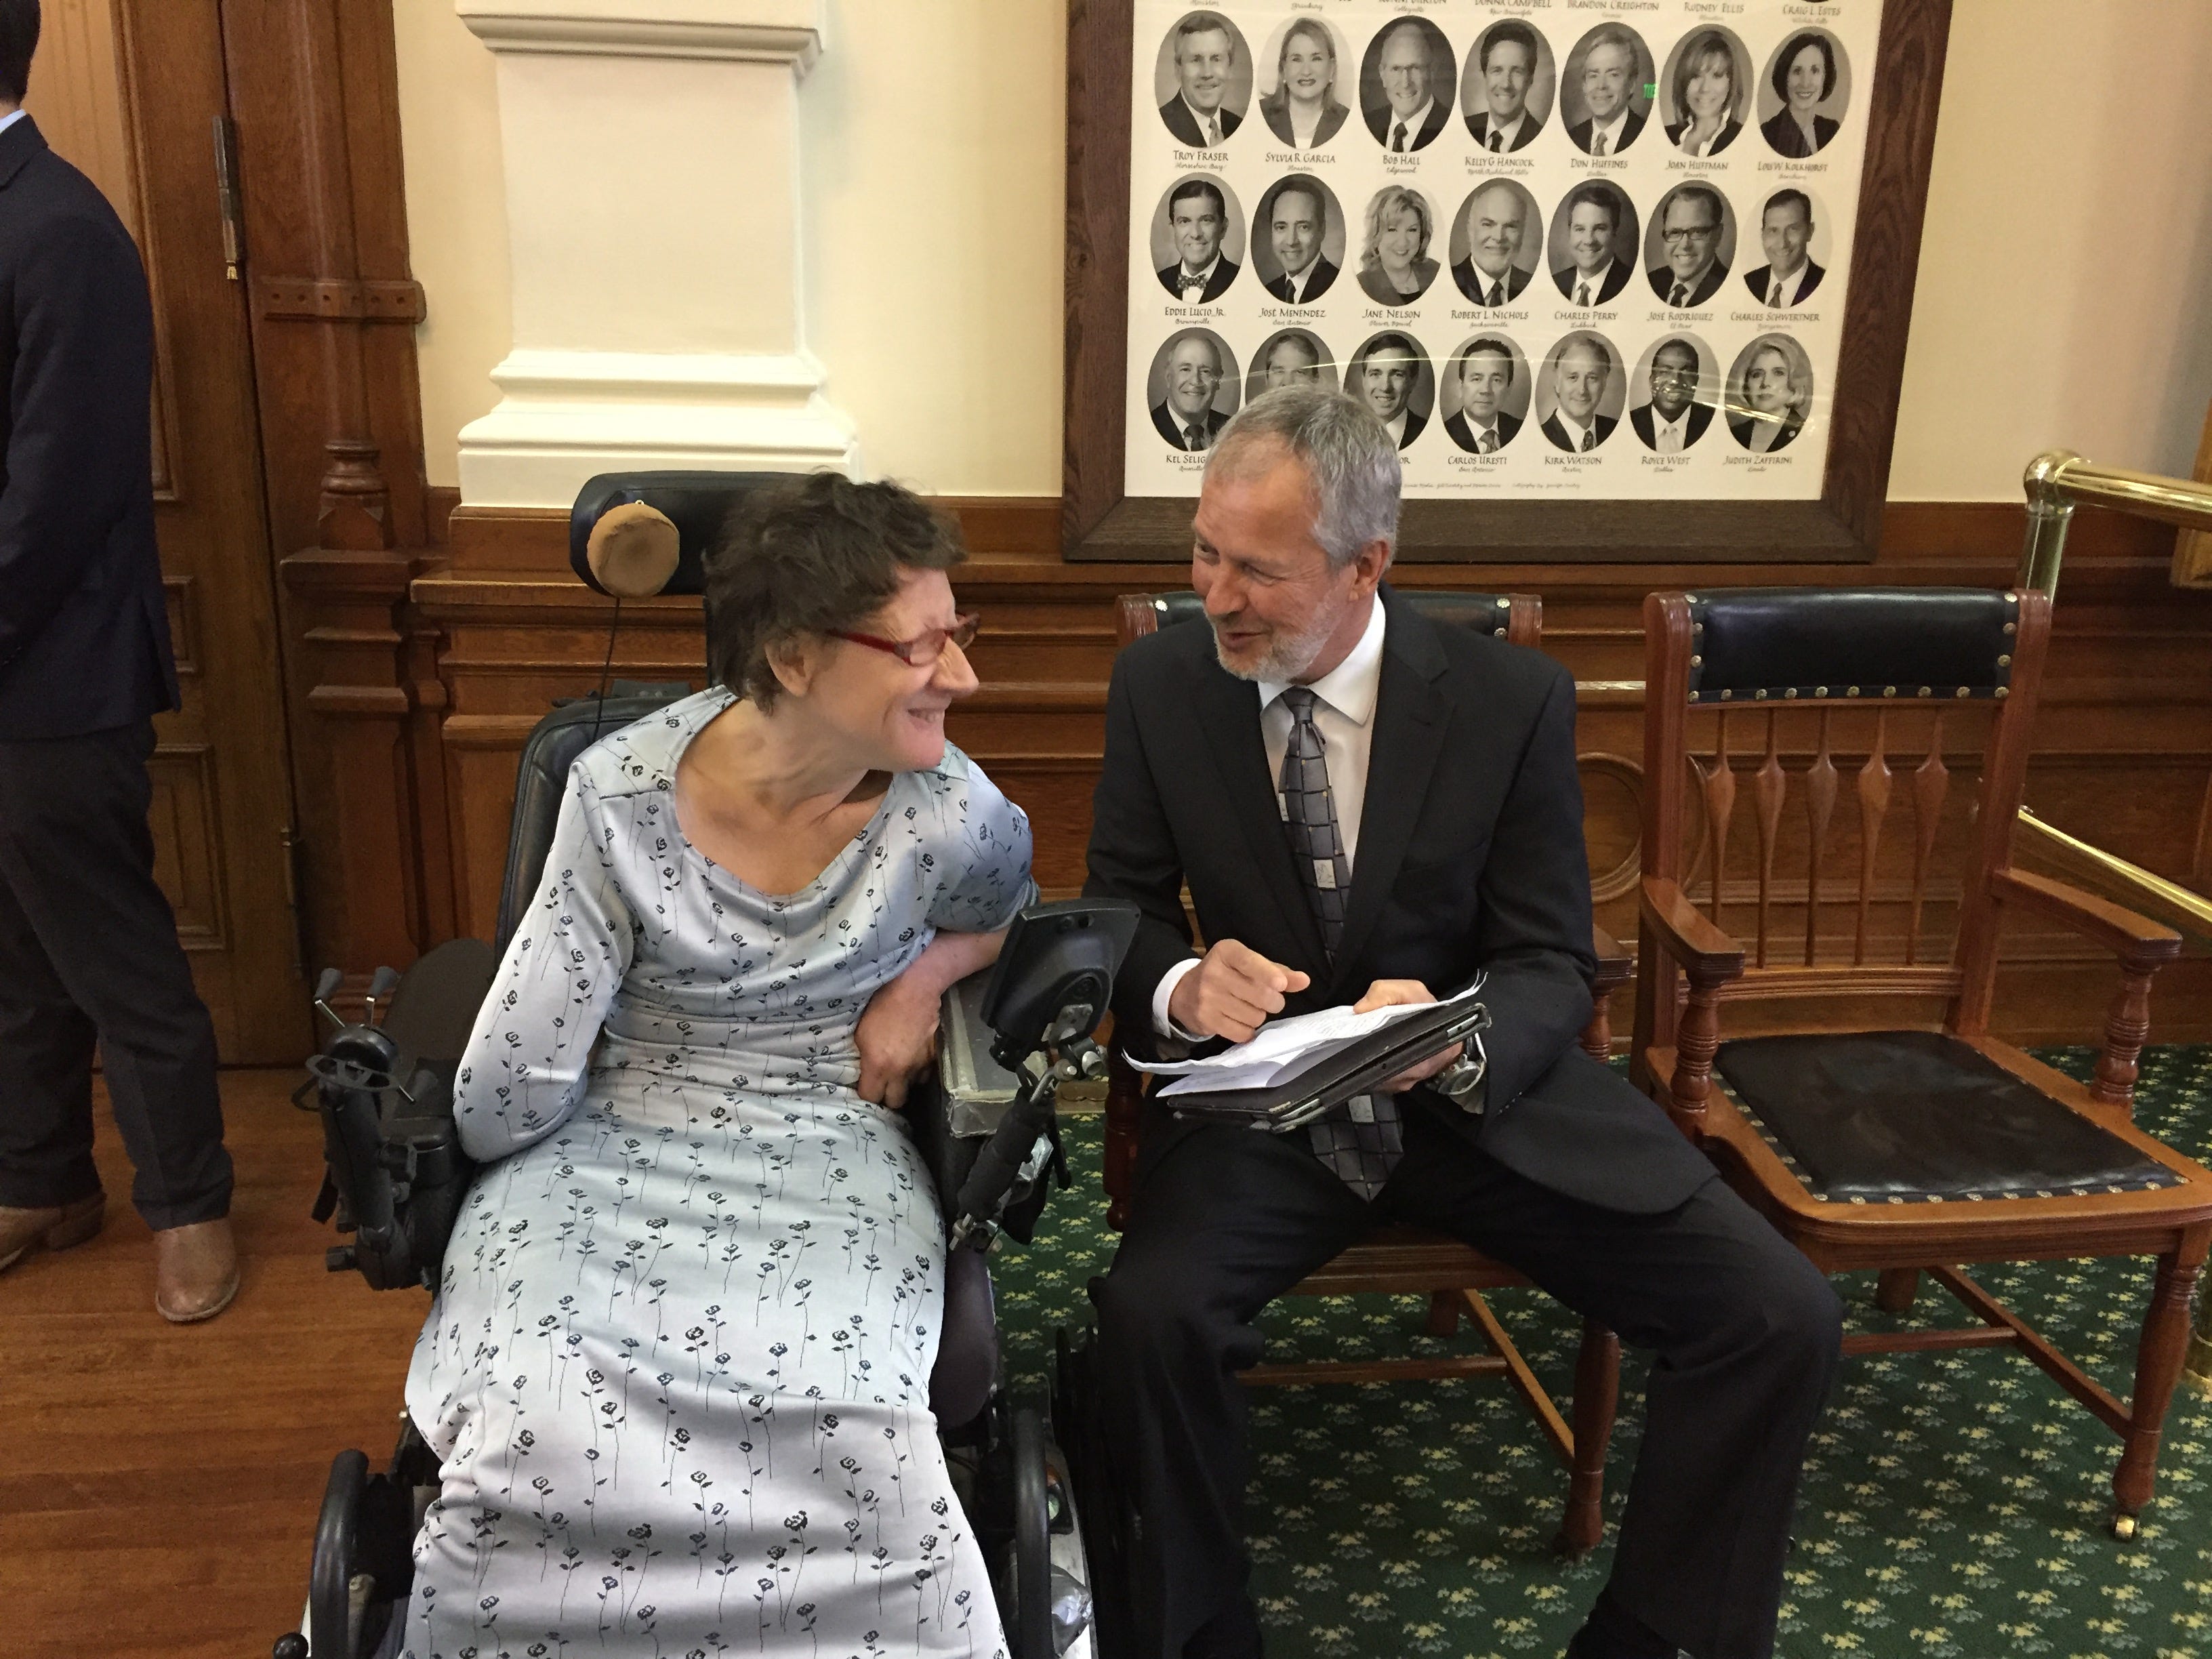 Gloria Susan Angel, a researcher and editor with cerebral palsy, speaks with Dennis Borel, executive director of the Coalition of Texans with Disabilities, at the Capitol in 2017. Angel was hospitalized three times and institutionalized in a nursing home after her caregiver died this summer, and no replacement caregiver could be found. Angel died in August.